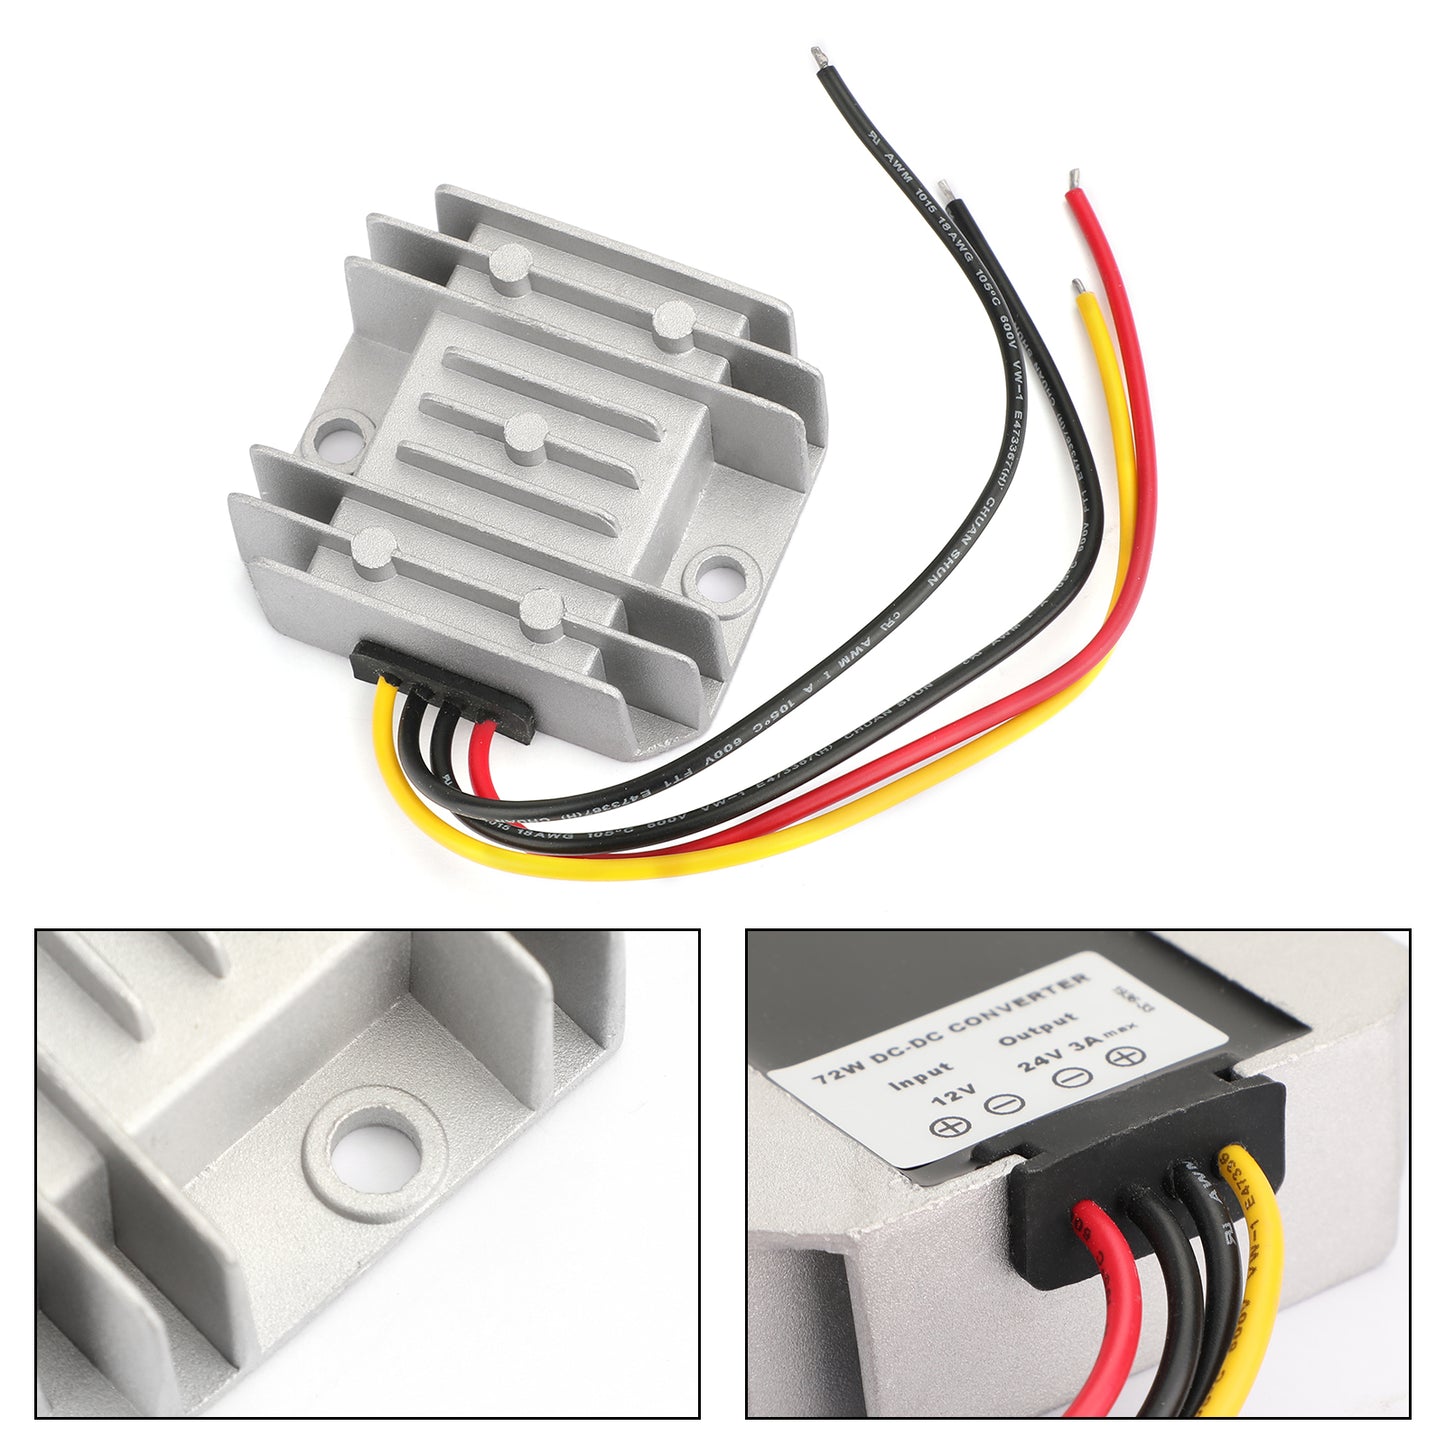 12V Auf 24V DC-DC Step Up Boost Spannungswandler 3A 72W Industrie-Netzteile